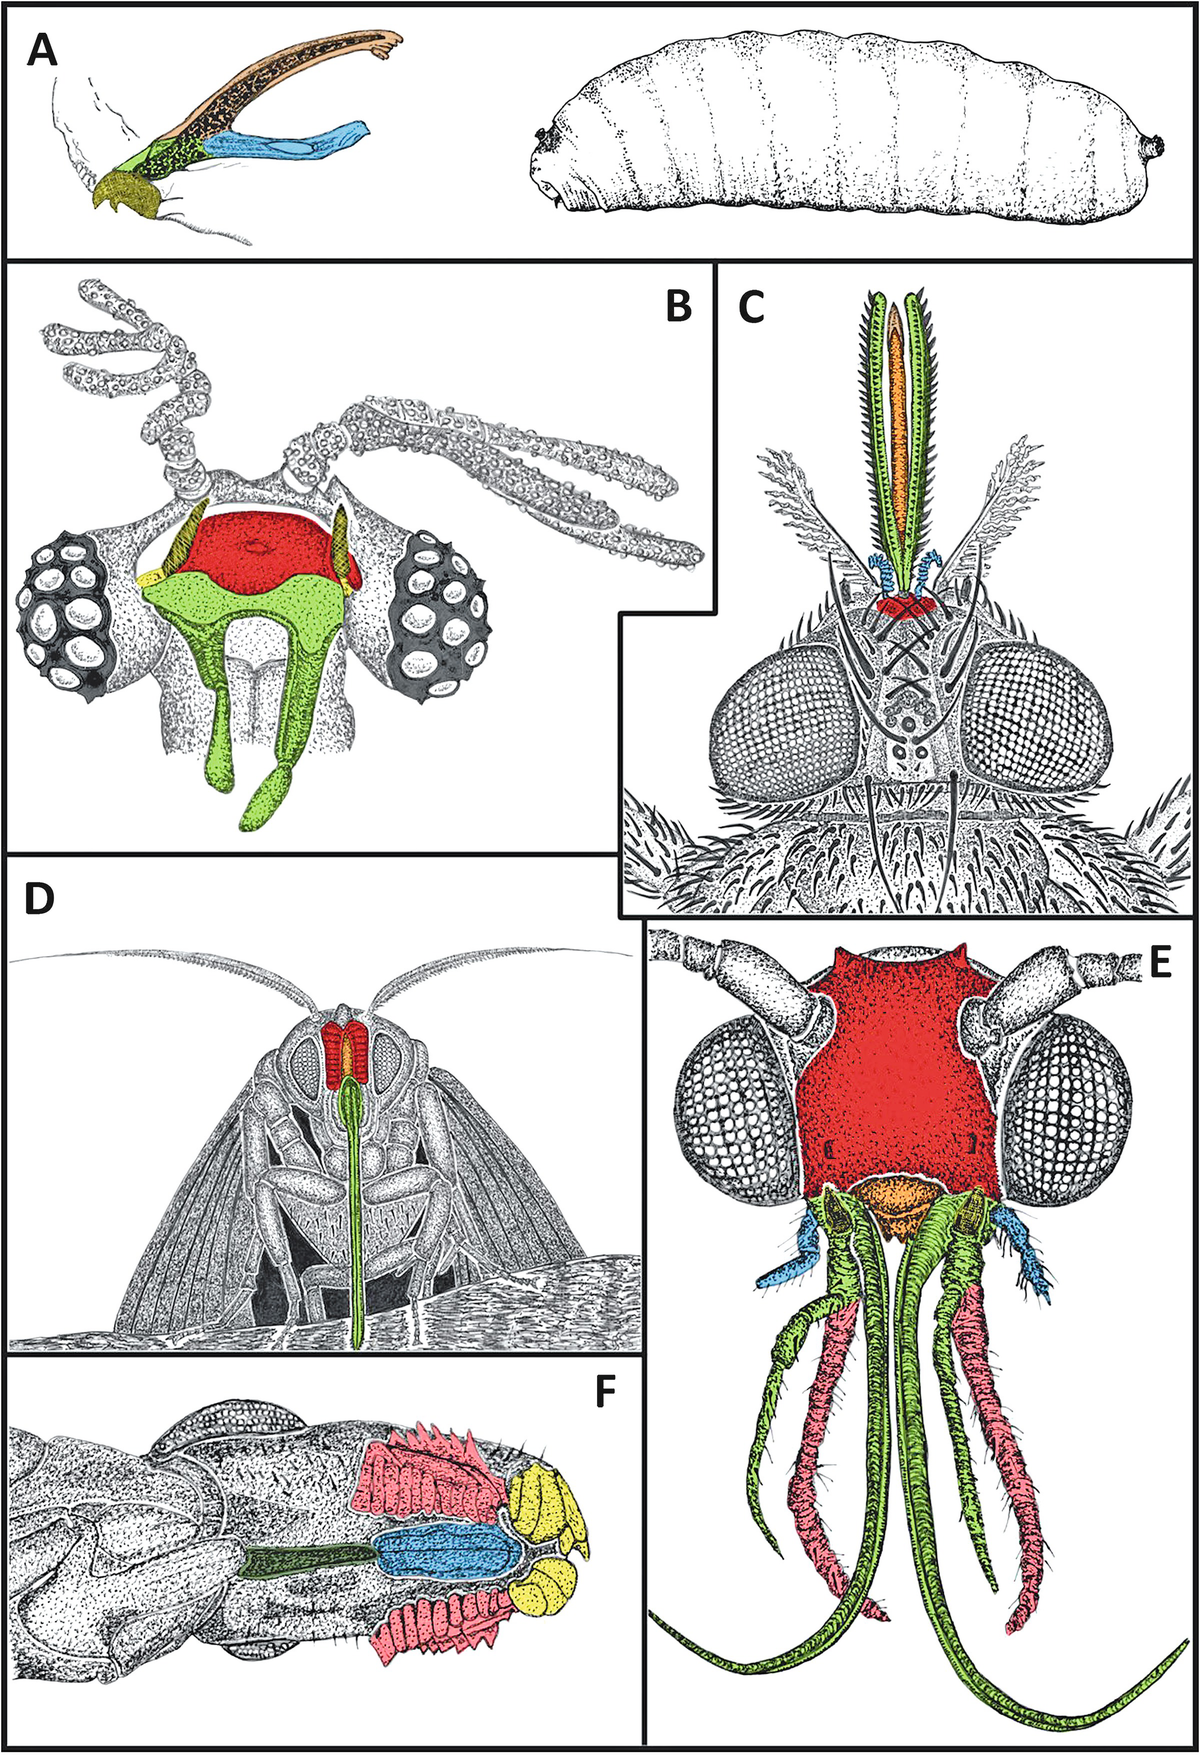 The Fossil Record Of Insect Mouthparts Innovation Functional Images, Photos, Reviews